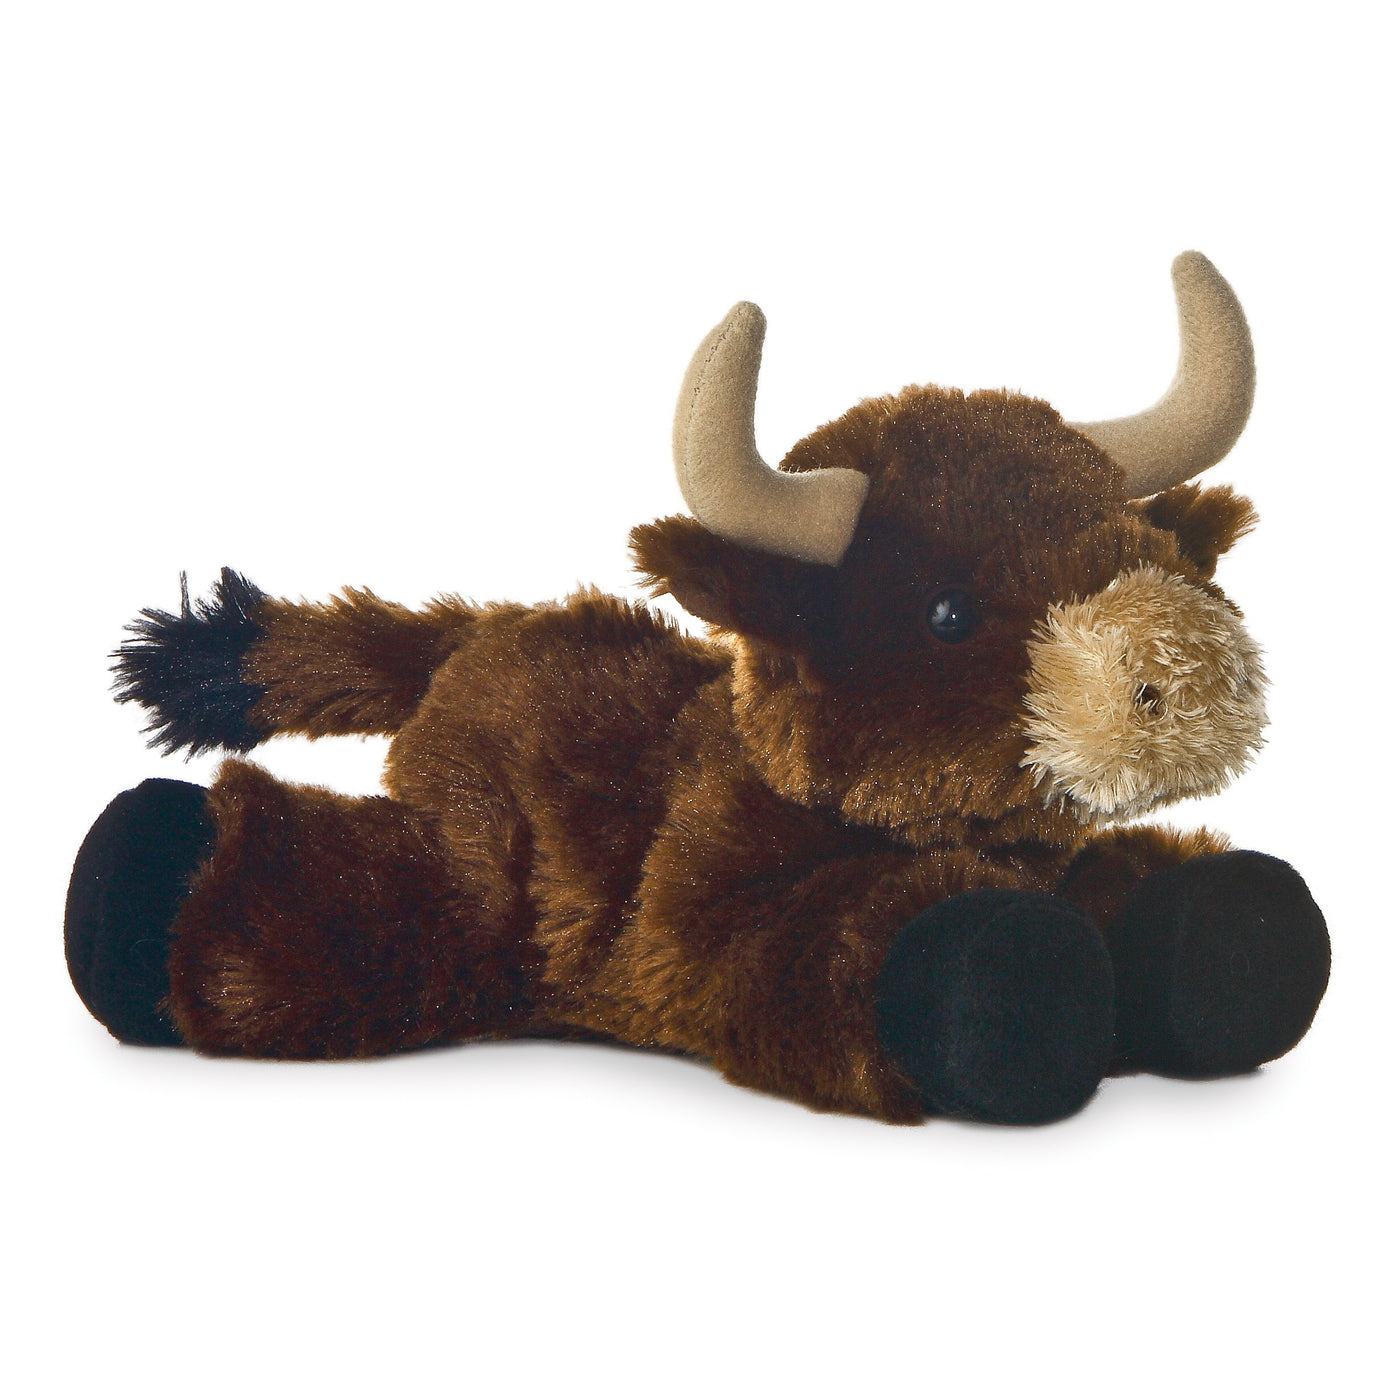 Aurora Flopsy 8" Plush Toy-HOME/GIFTWARE-TORO-Kevin's Fine Outdoor Gear & Apparel